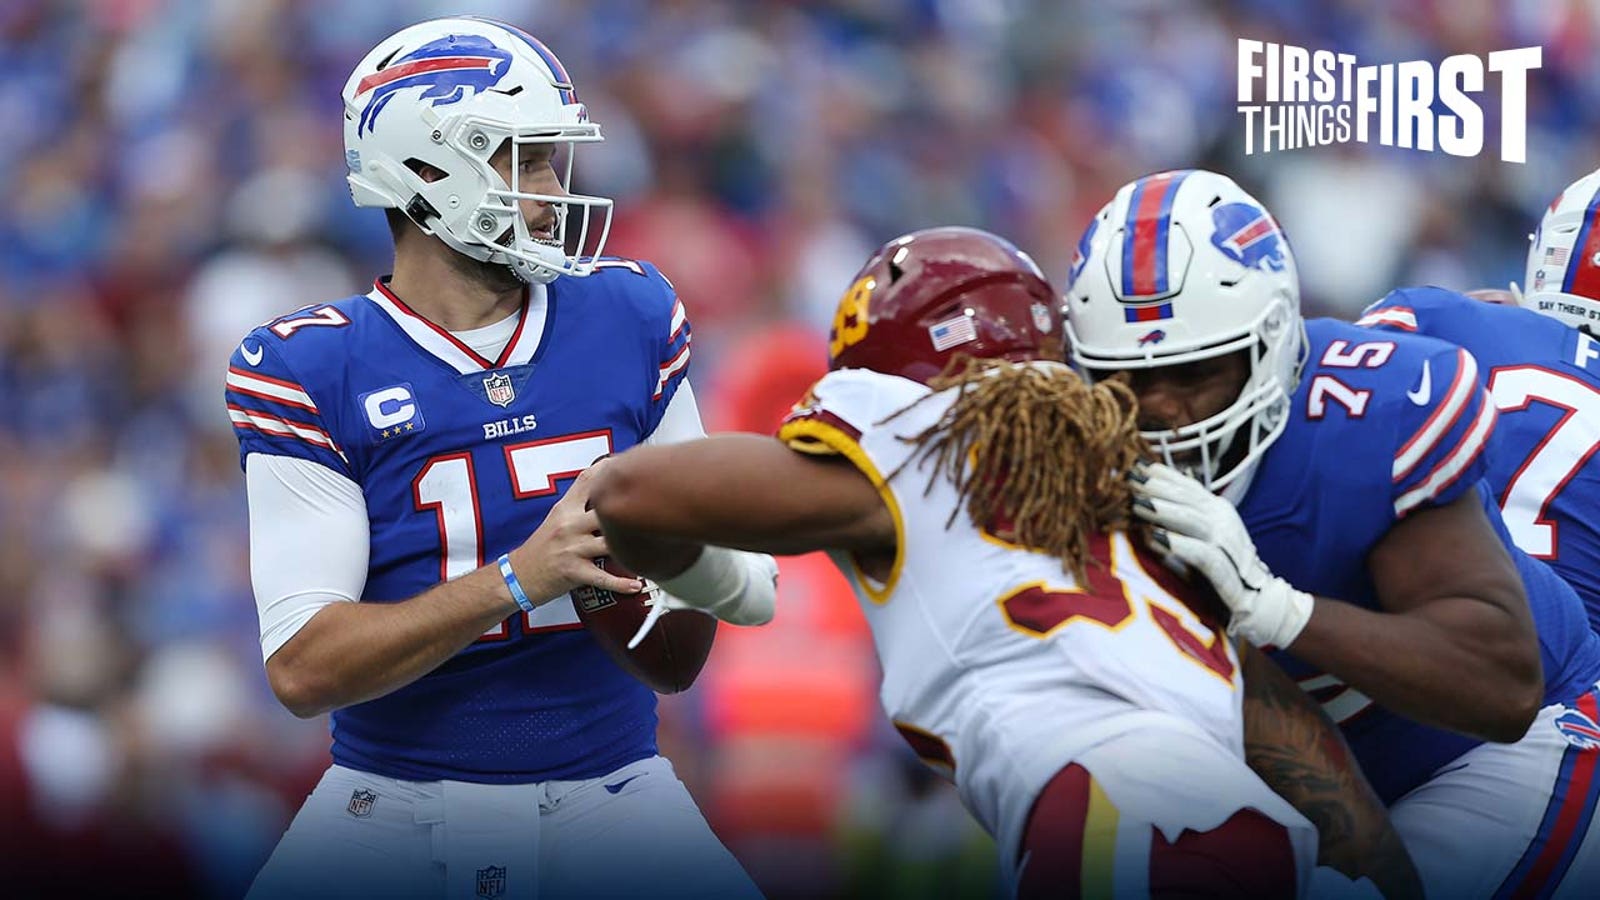 Chris Broussard: Josh Allen and the Bills completely stomped Kansas City I FIRST THINGS FIRST